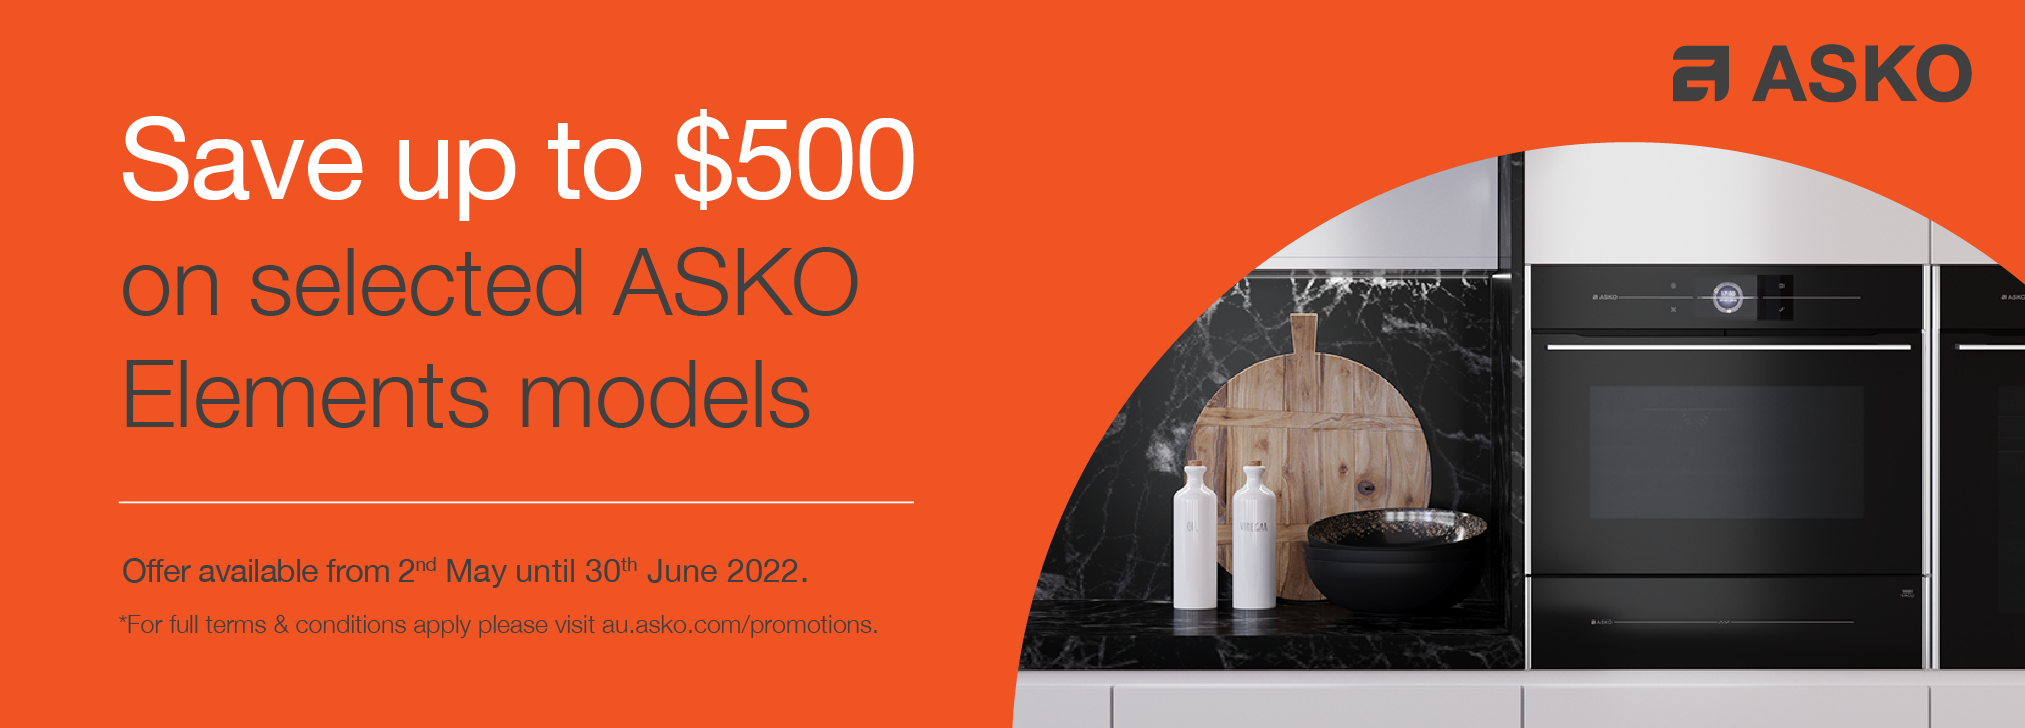 Save up to $500 on selected Asko Elements models